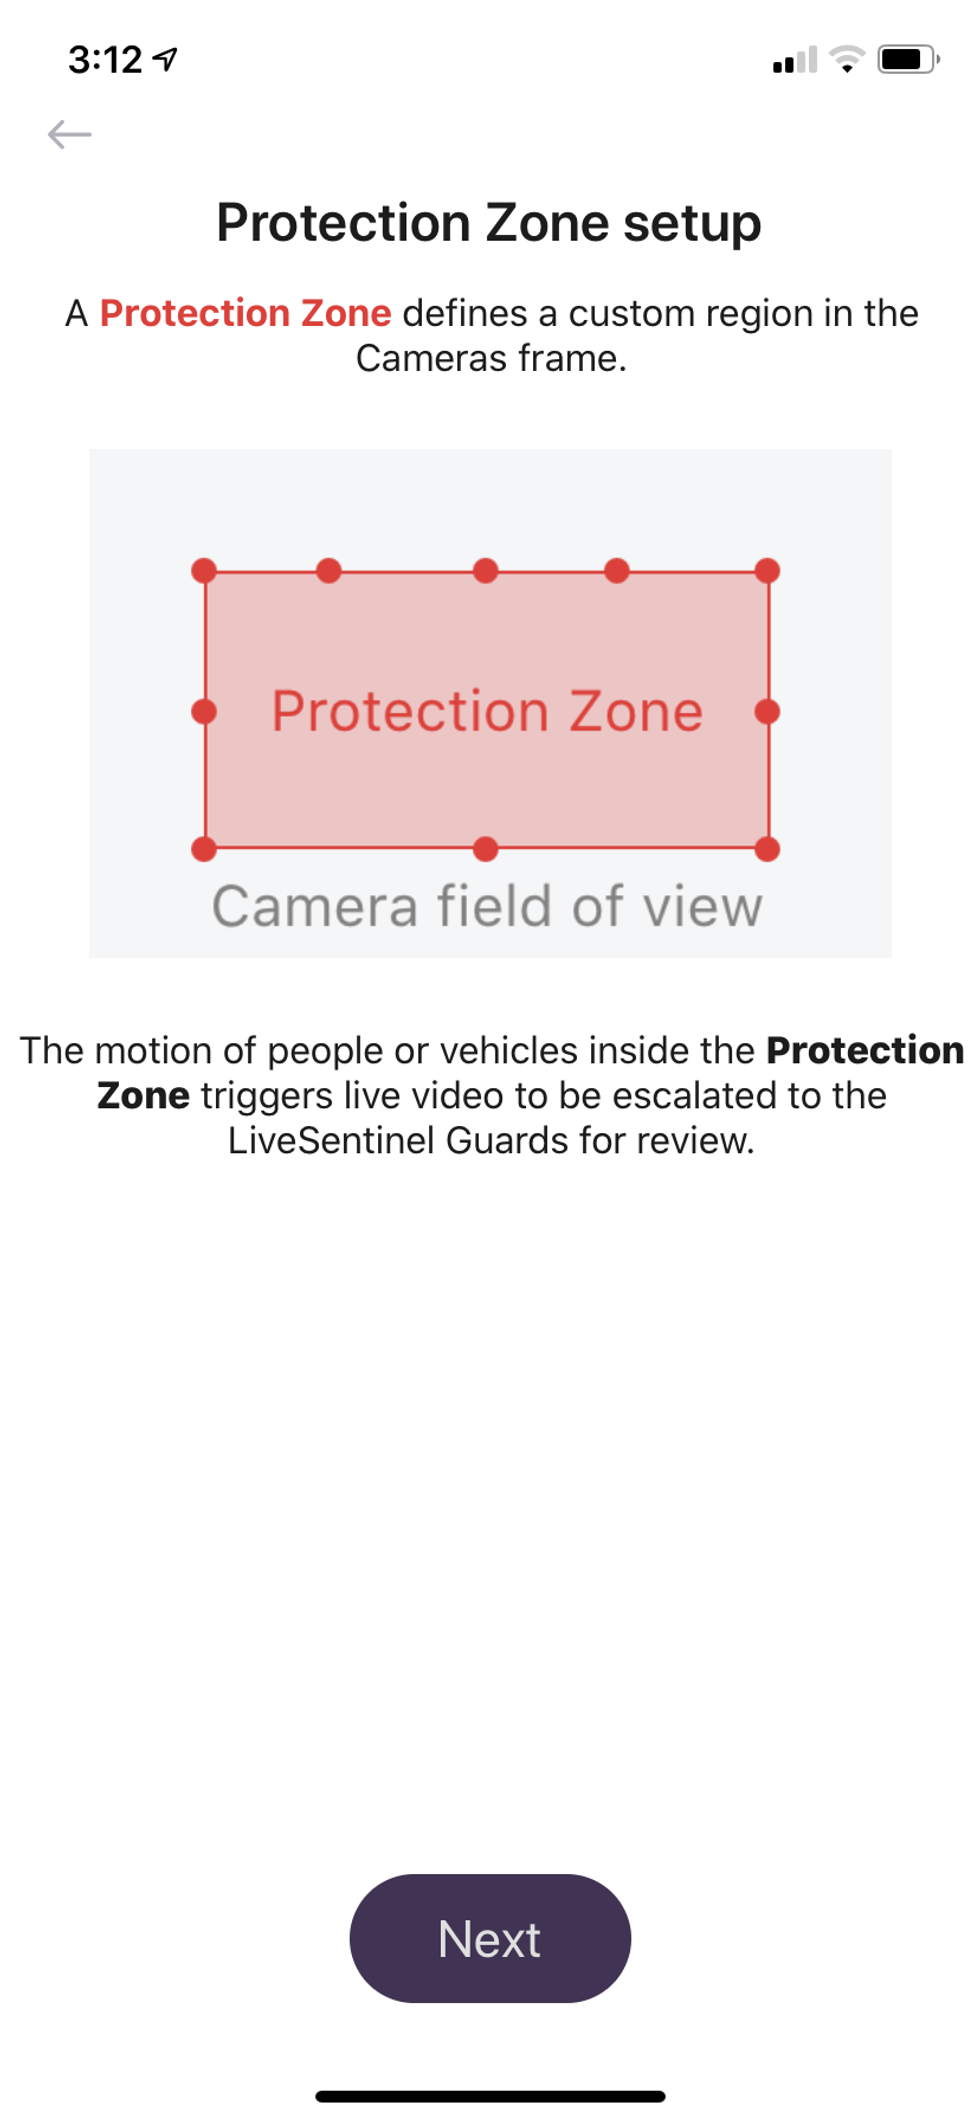 How to setup protection zones in the app